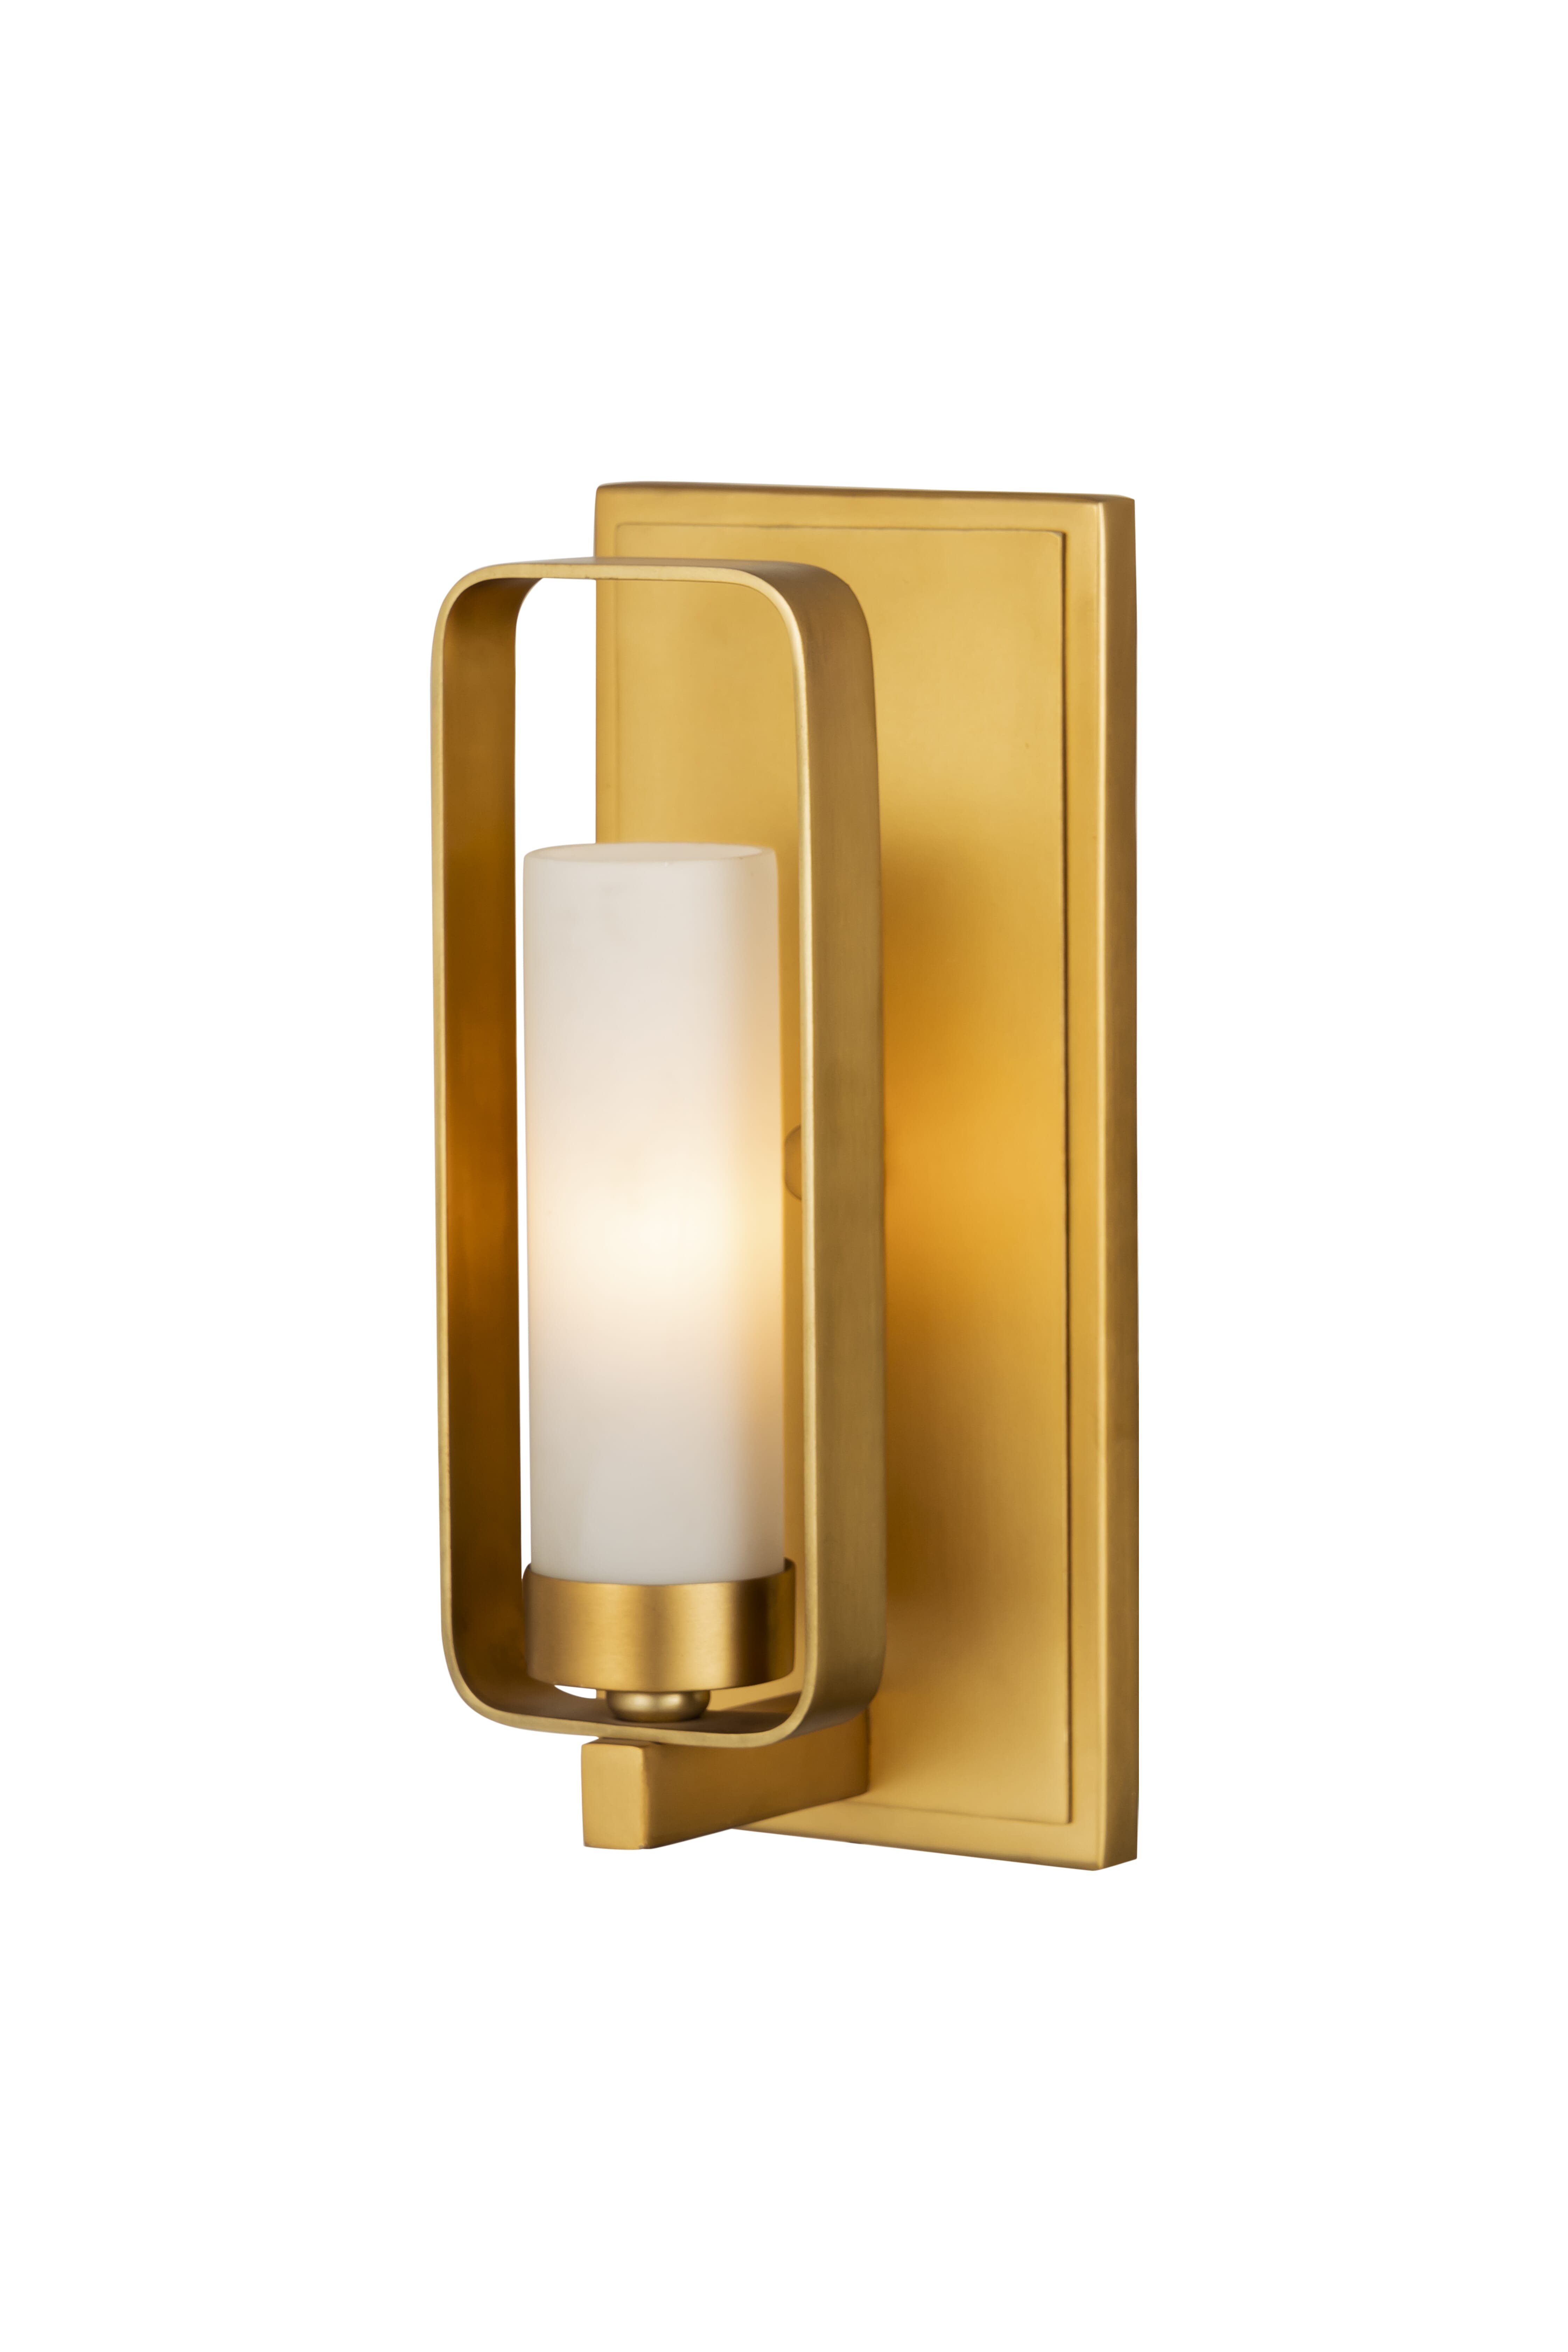 Aideen 1-Light Wall Sconce In Tawny Brass